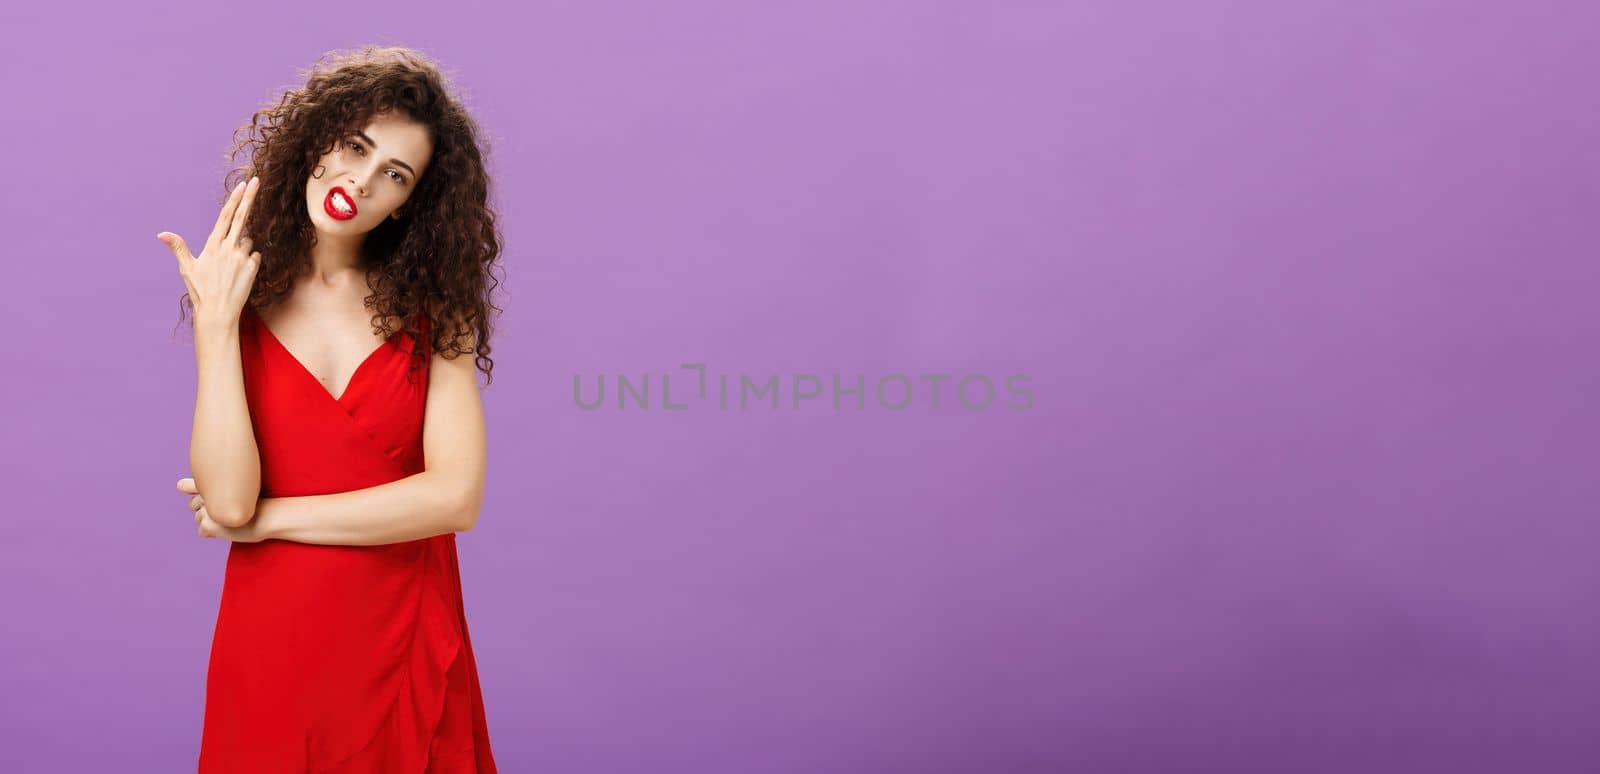 Rules killing me. Rebellious hot and stylish european woman in elegant red dress with curly hairstyle tilting head showing finger gun gesture as if blowing brains from boredom over purple background by Benzoix